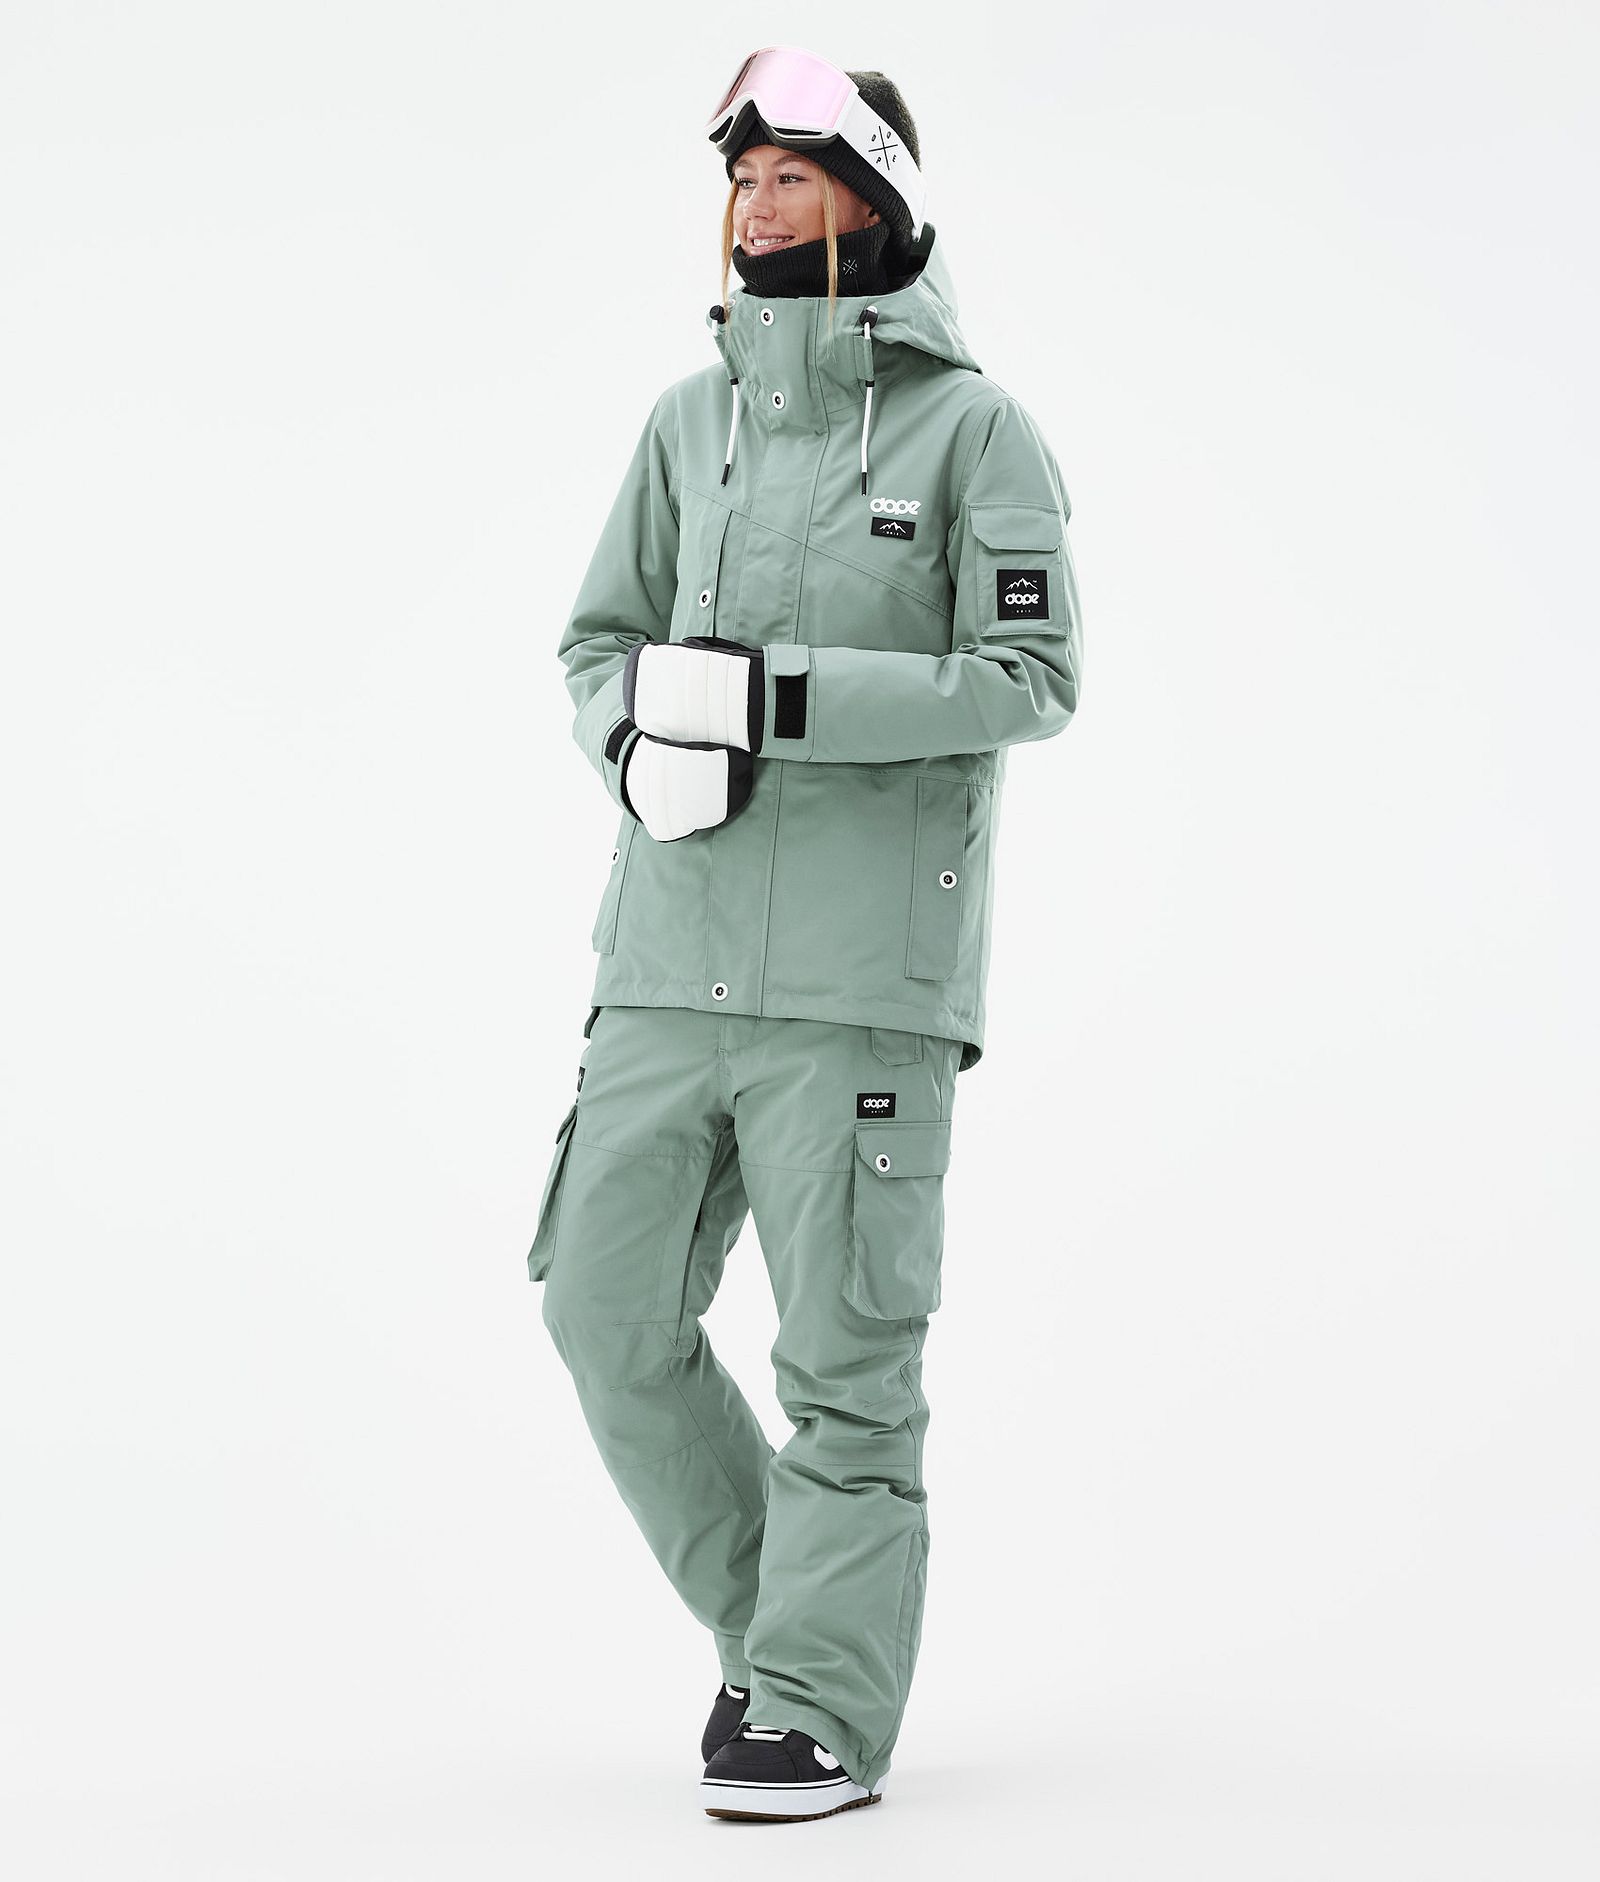 Dope Adept W Outfit de Snowboard Mujer Faded Green